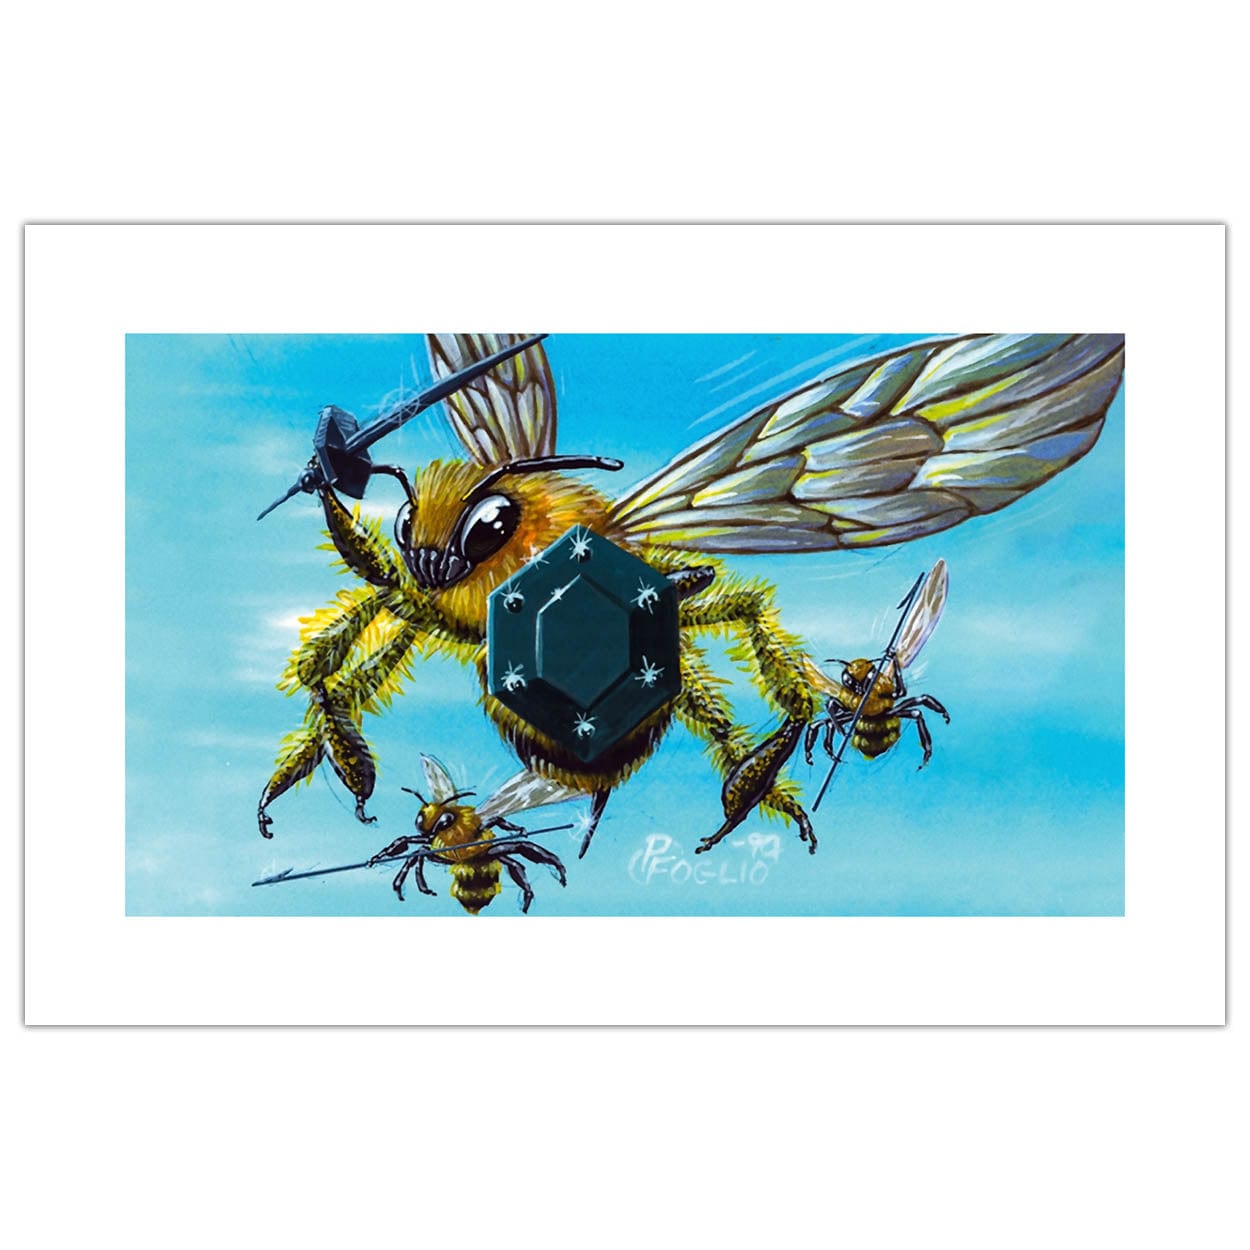 Killer Bees Print (Limited Edition)